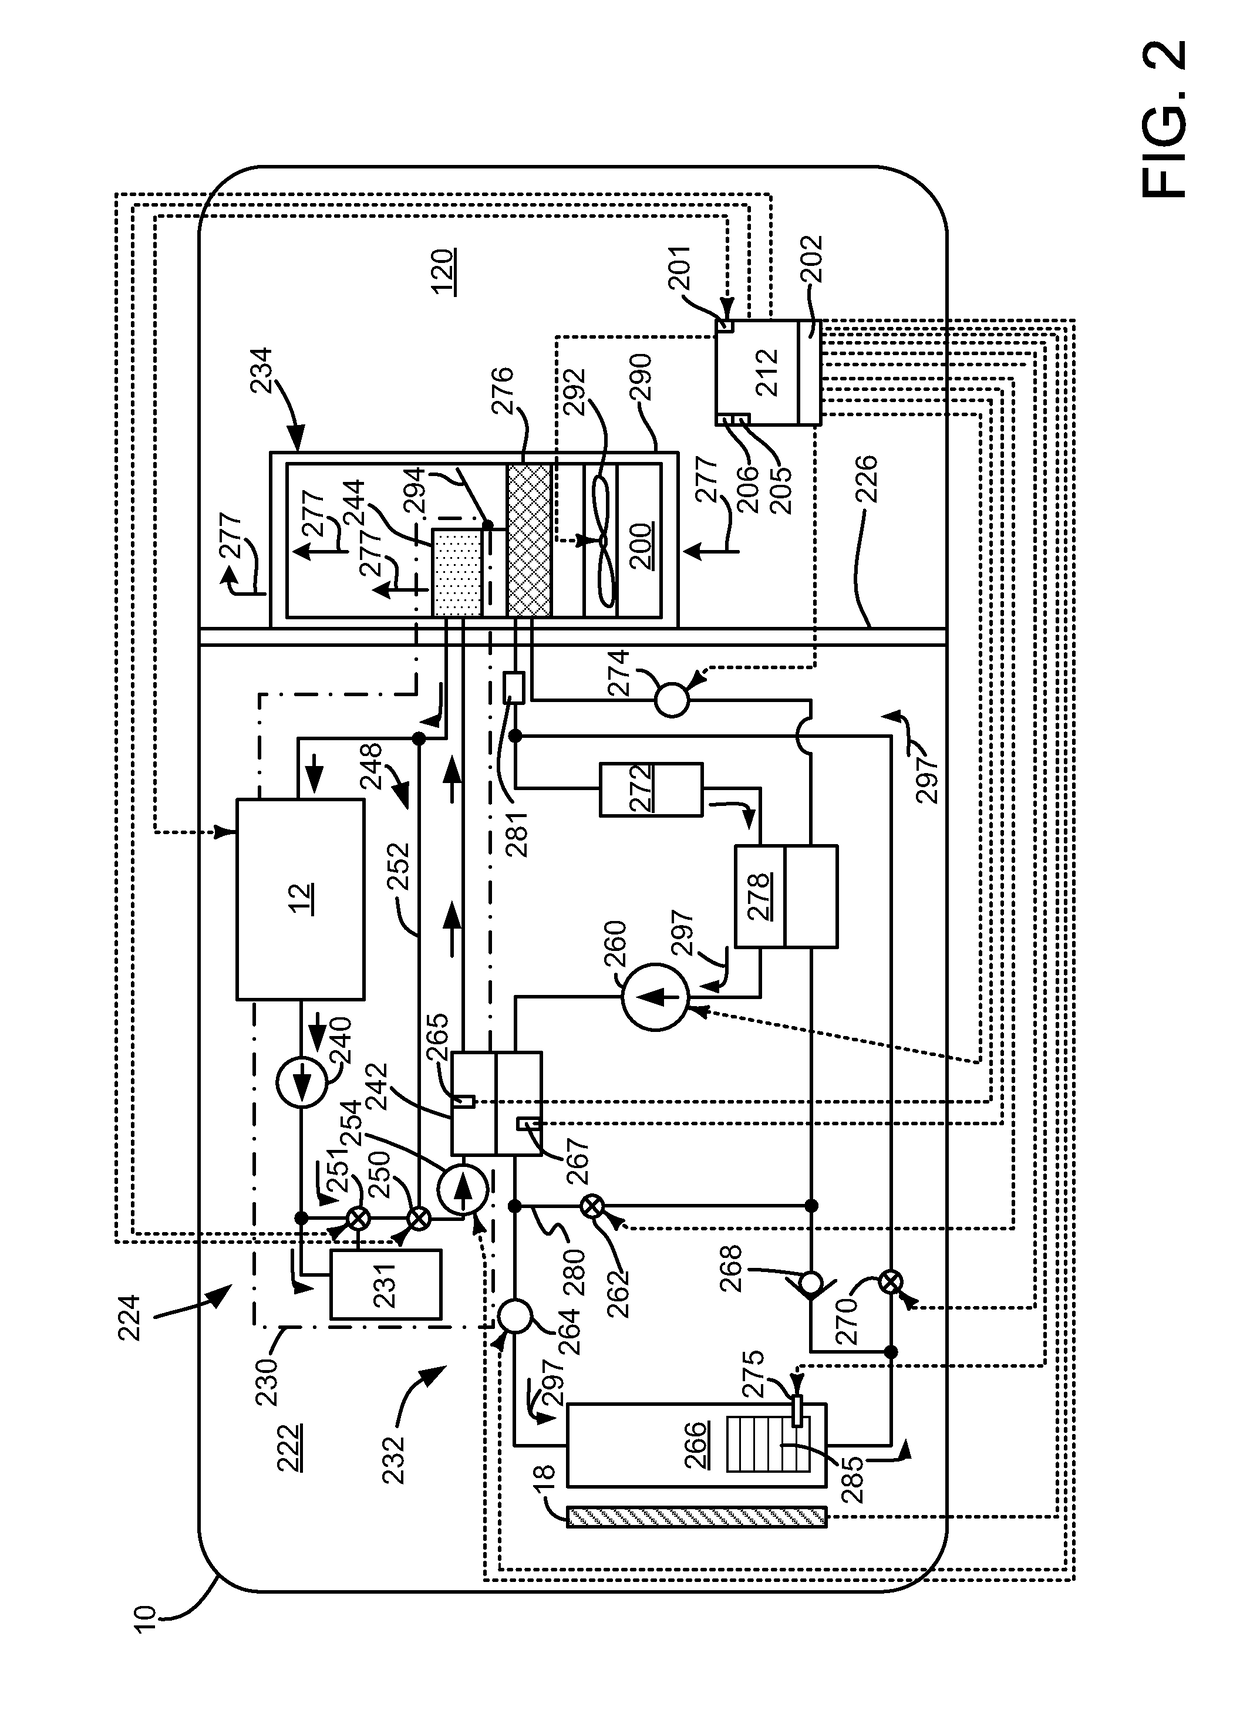 Method and system for de-icing a heat exchanger